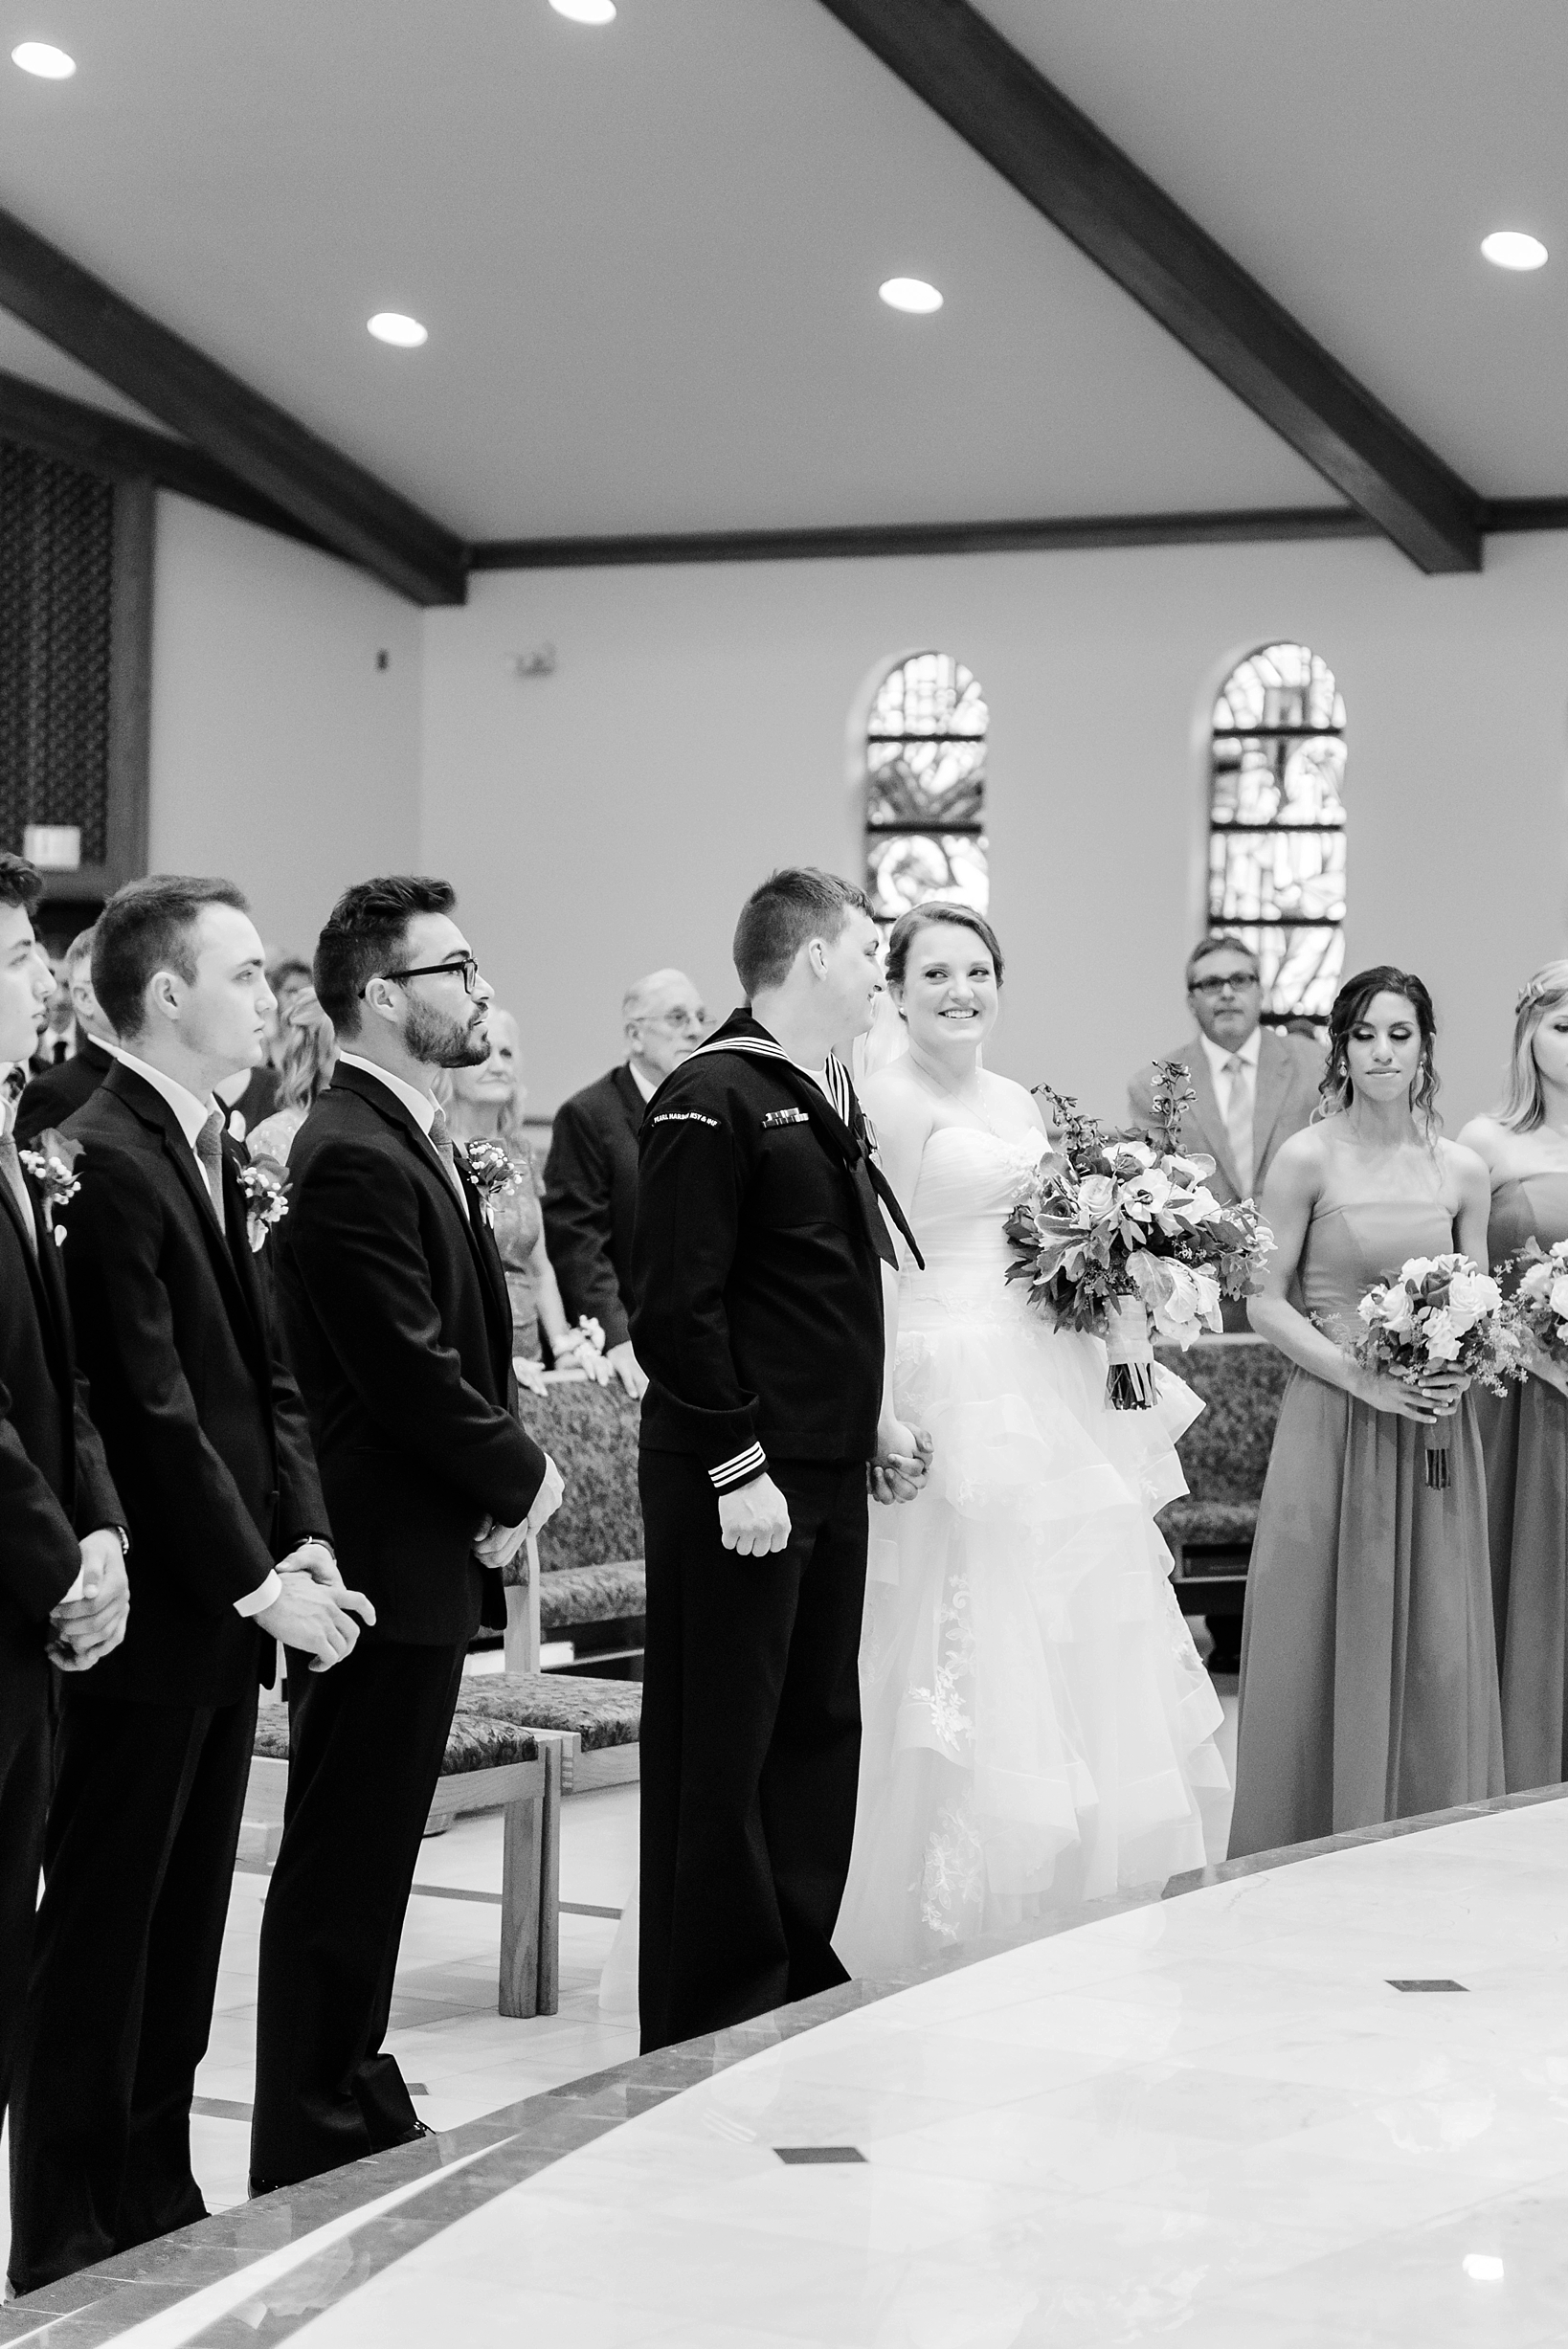 Bride gives her groom a huge smile during their wedding ceremony